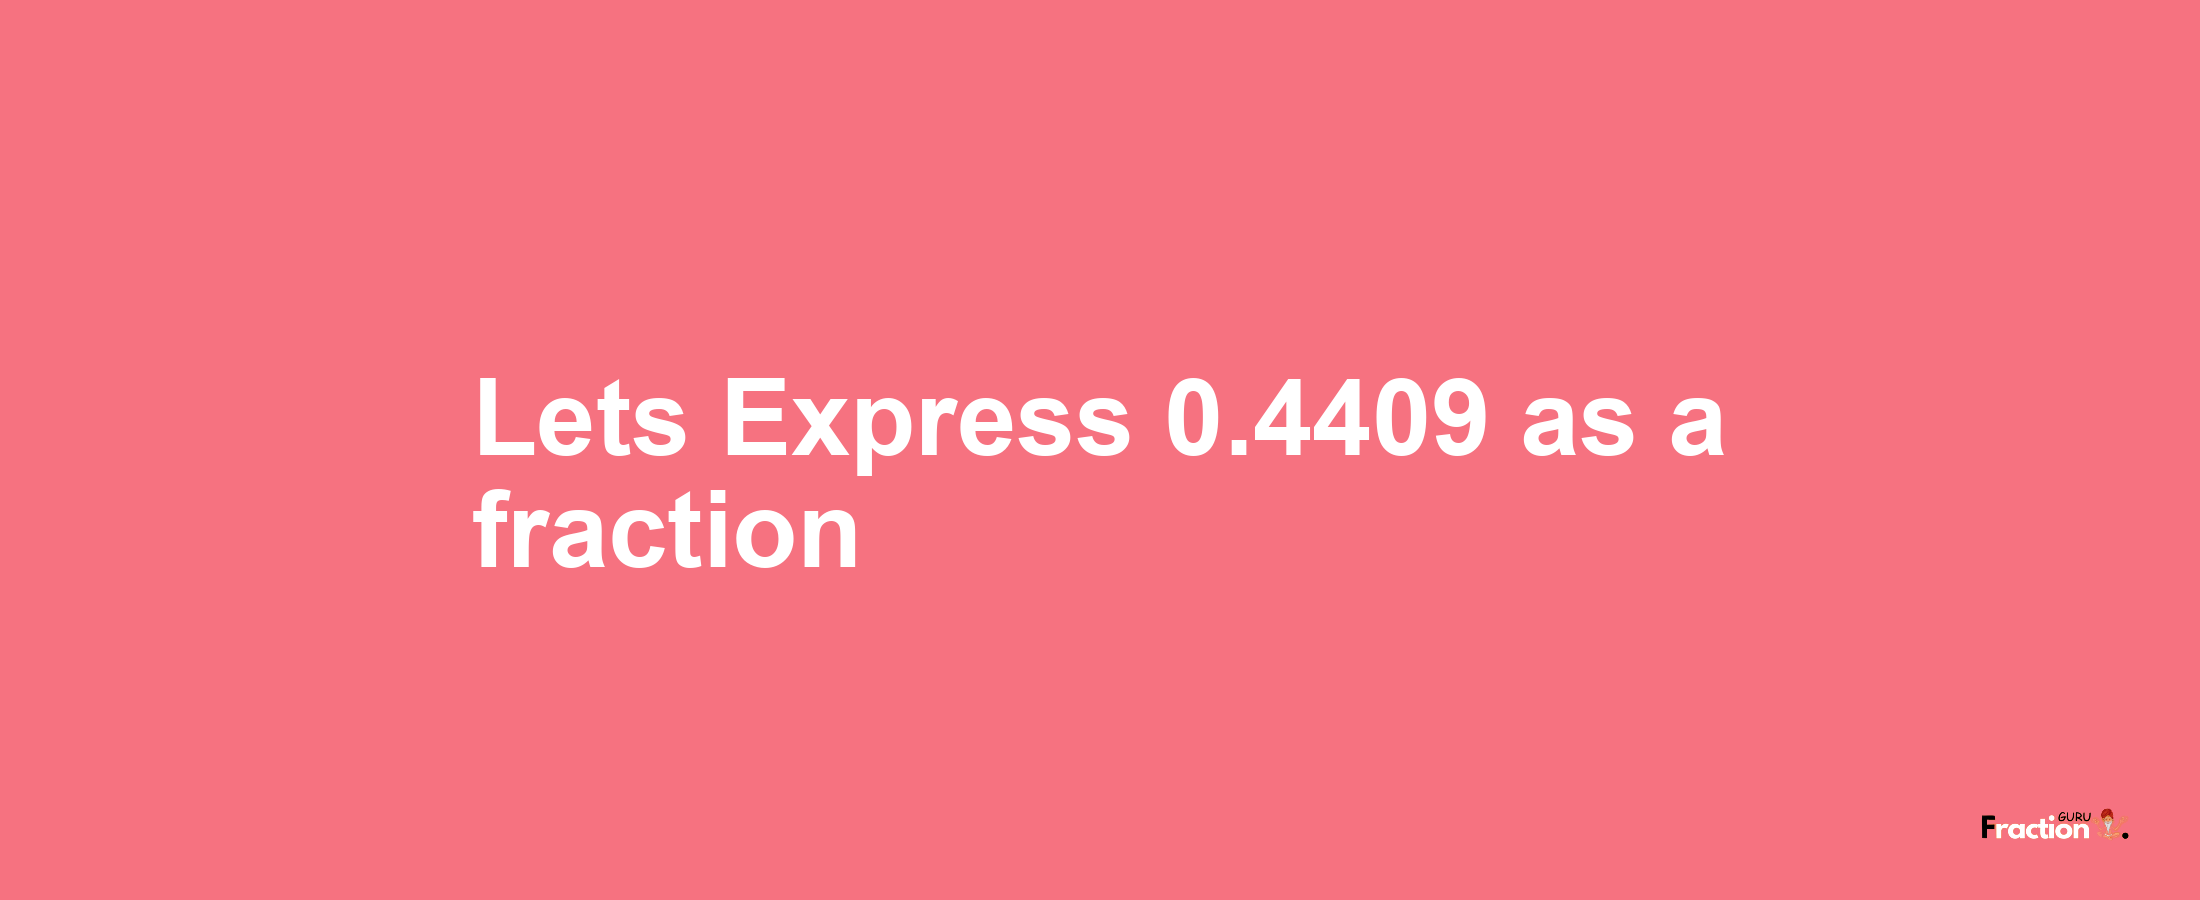 Lets Express 0.4409 as afraction